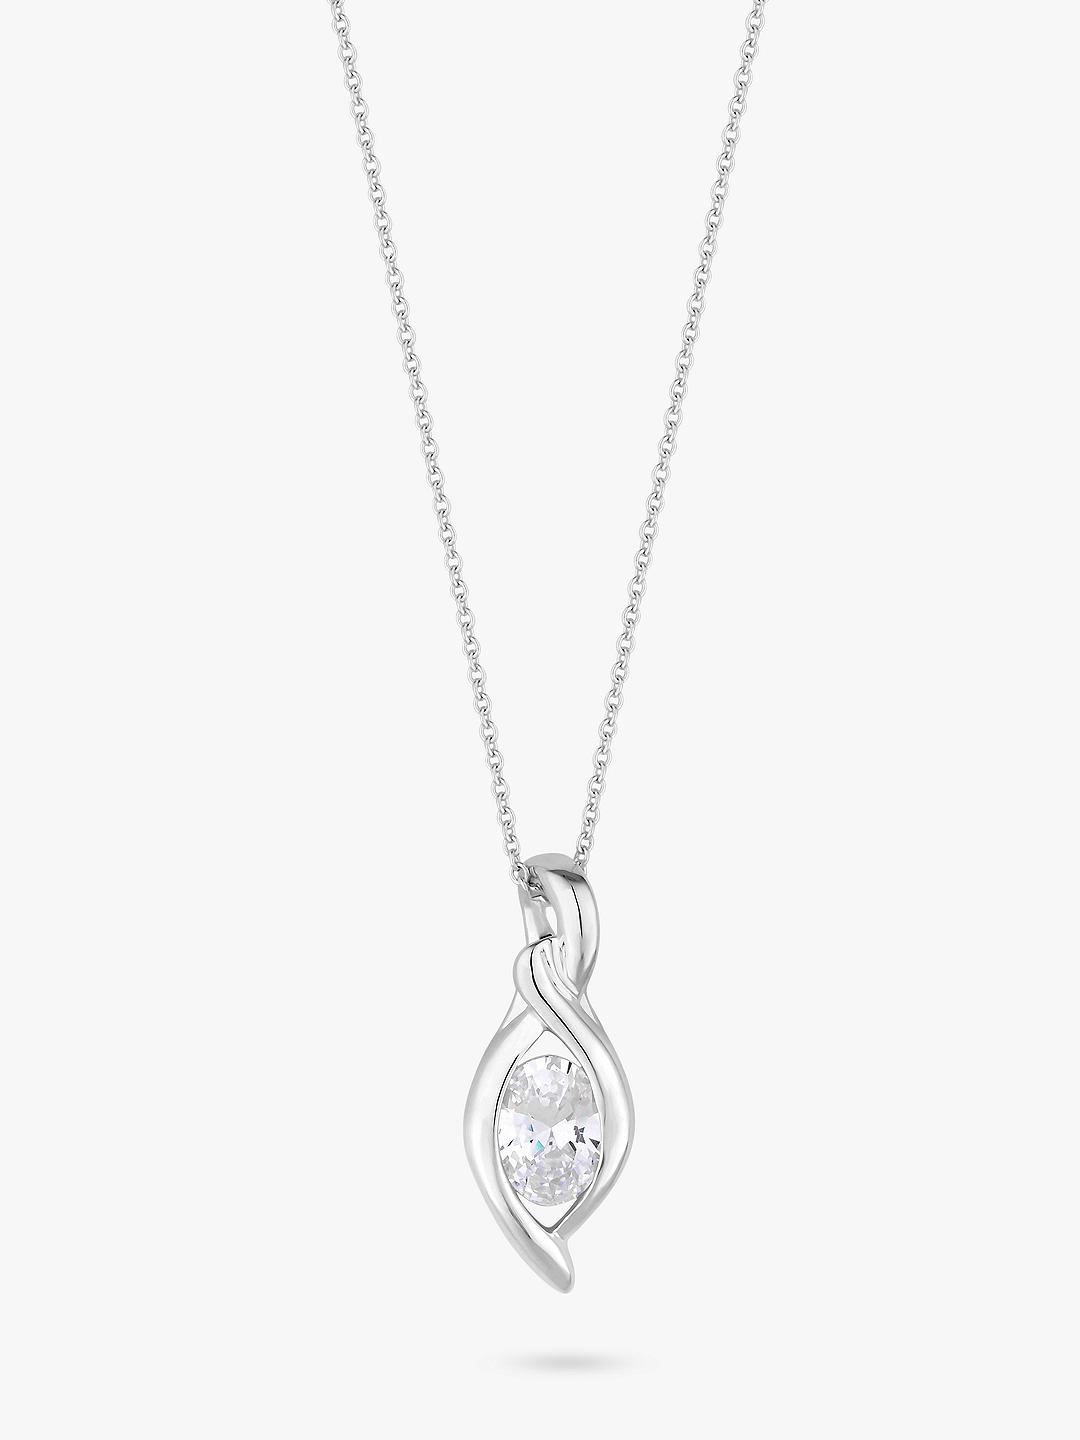 Simply Silver Cubic Zirconia Navette Pendant Necklace, Silver